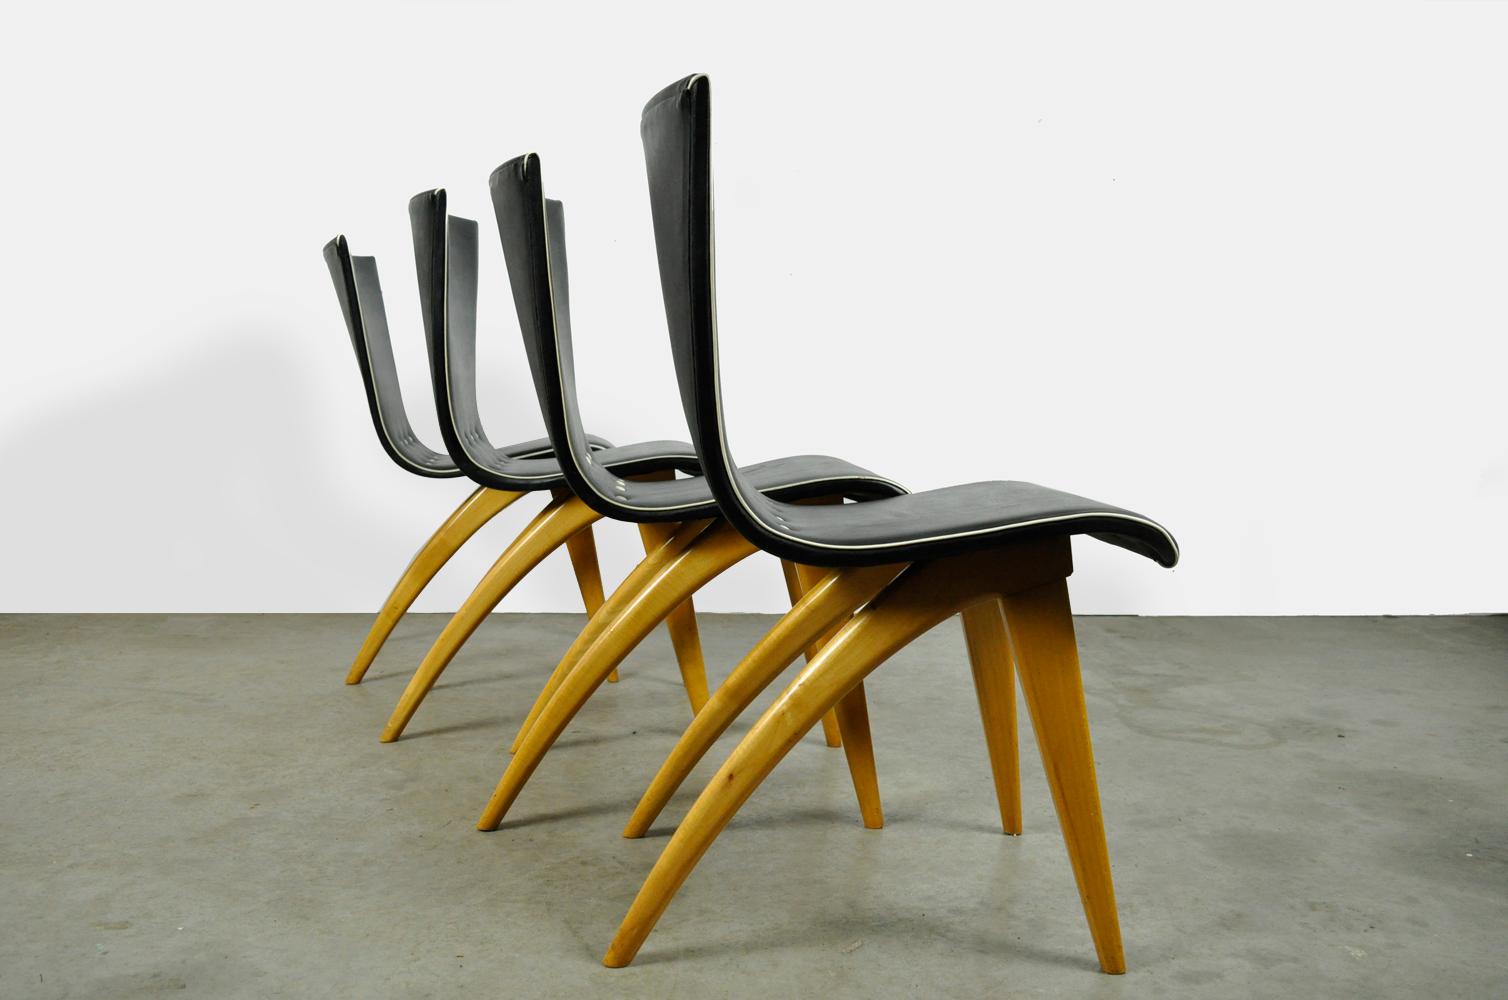 Dutch Set wingback dining chairs (4) by G.J. van Os for van Os Culemborg, 1950s For Sale